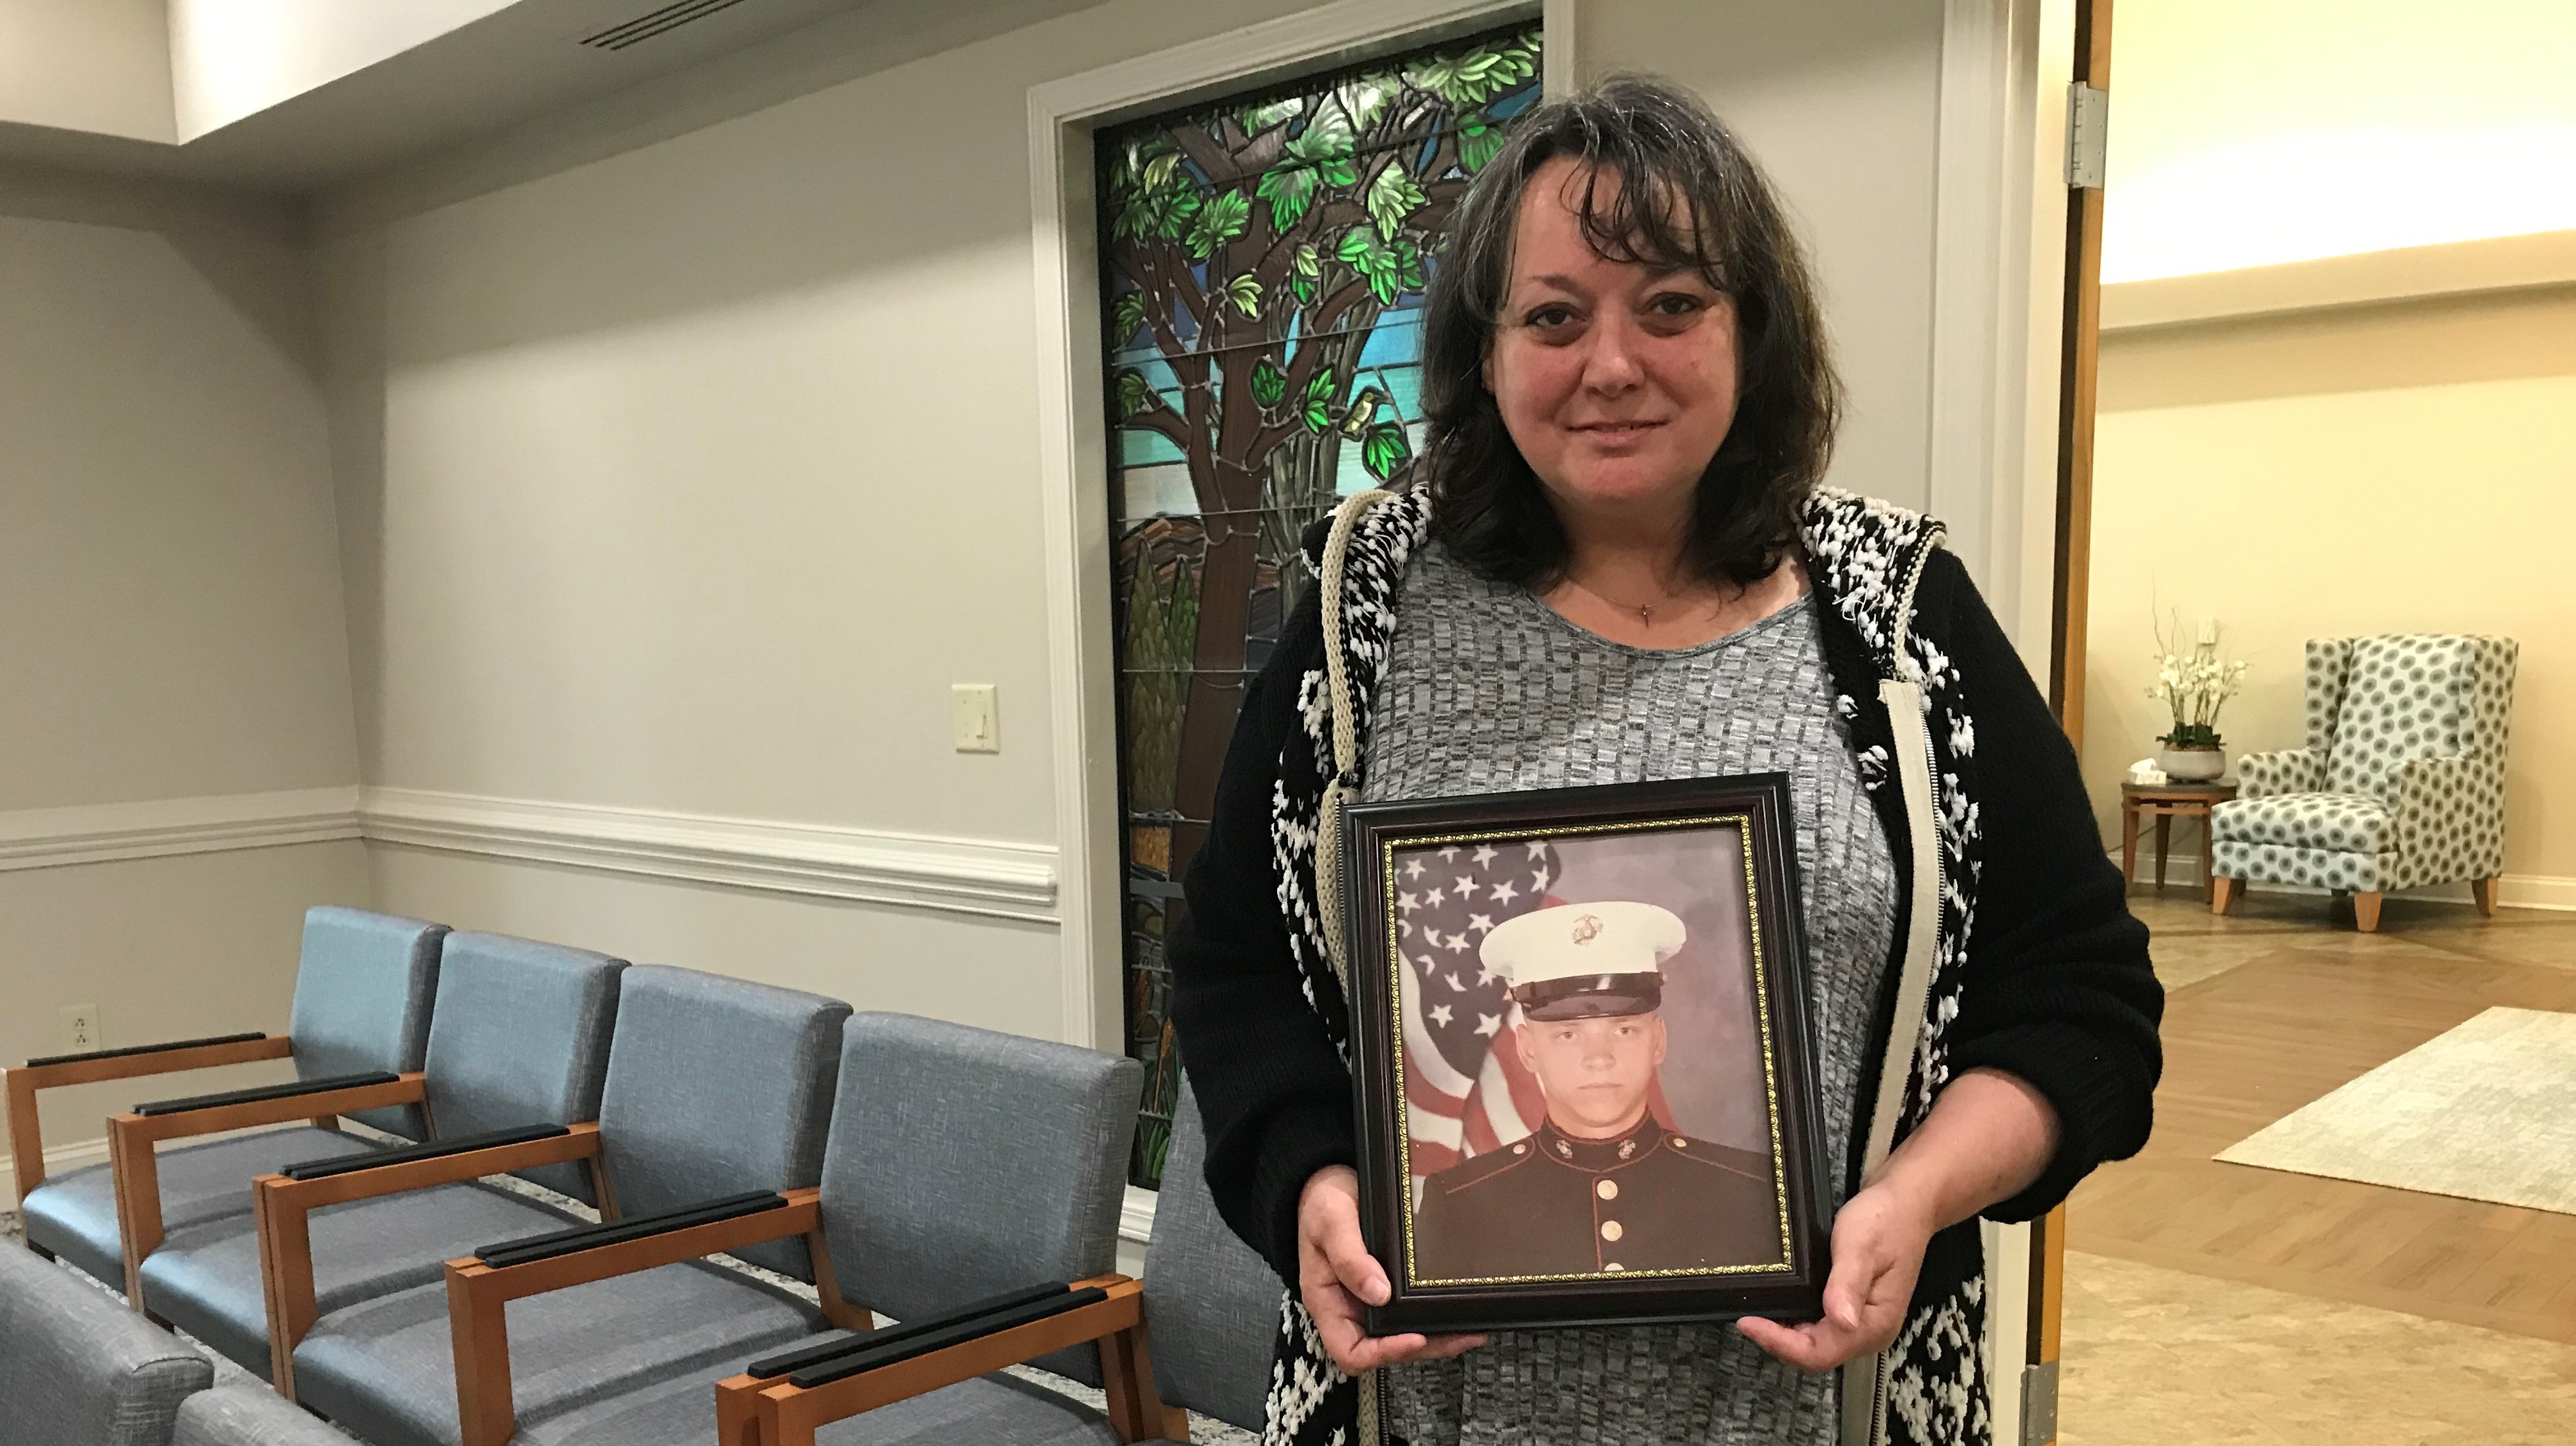 Bedside salutes among the ways hospice team honors, supports veterans